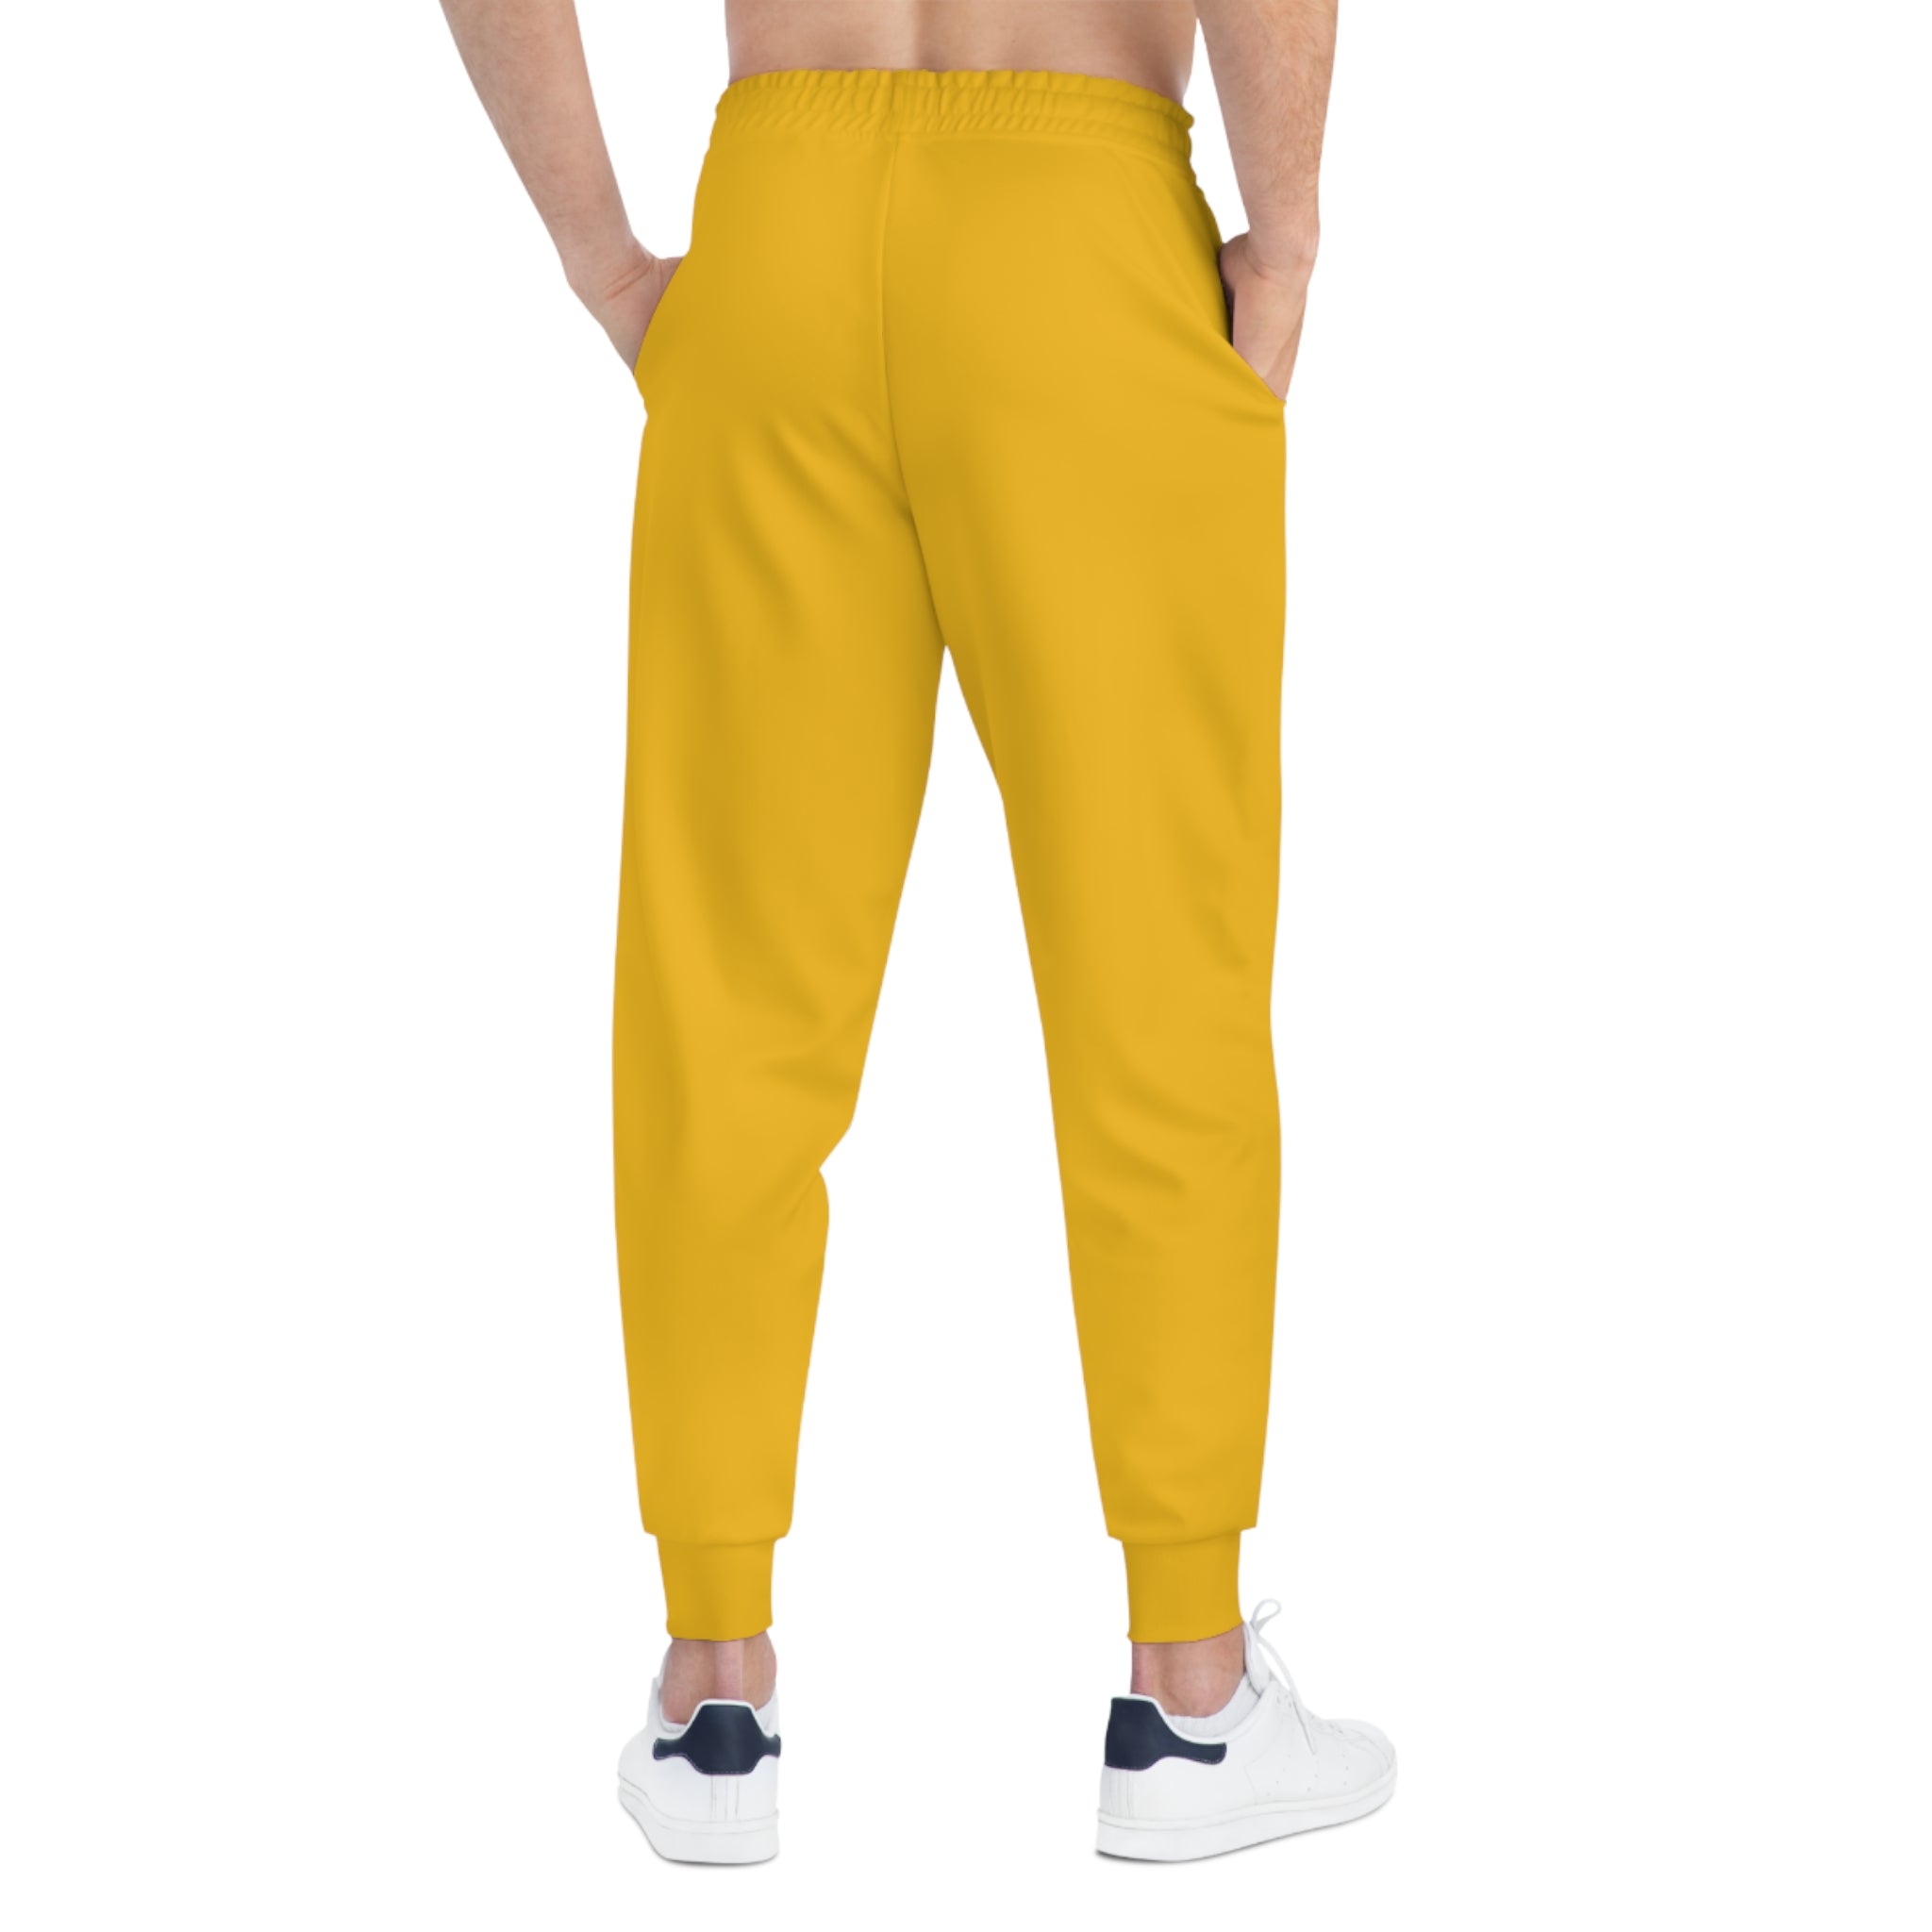 CombinedMinds Athletic Joggers Yellow/Color Logo